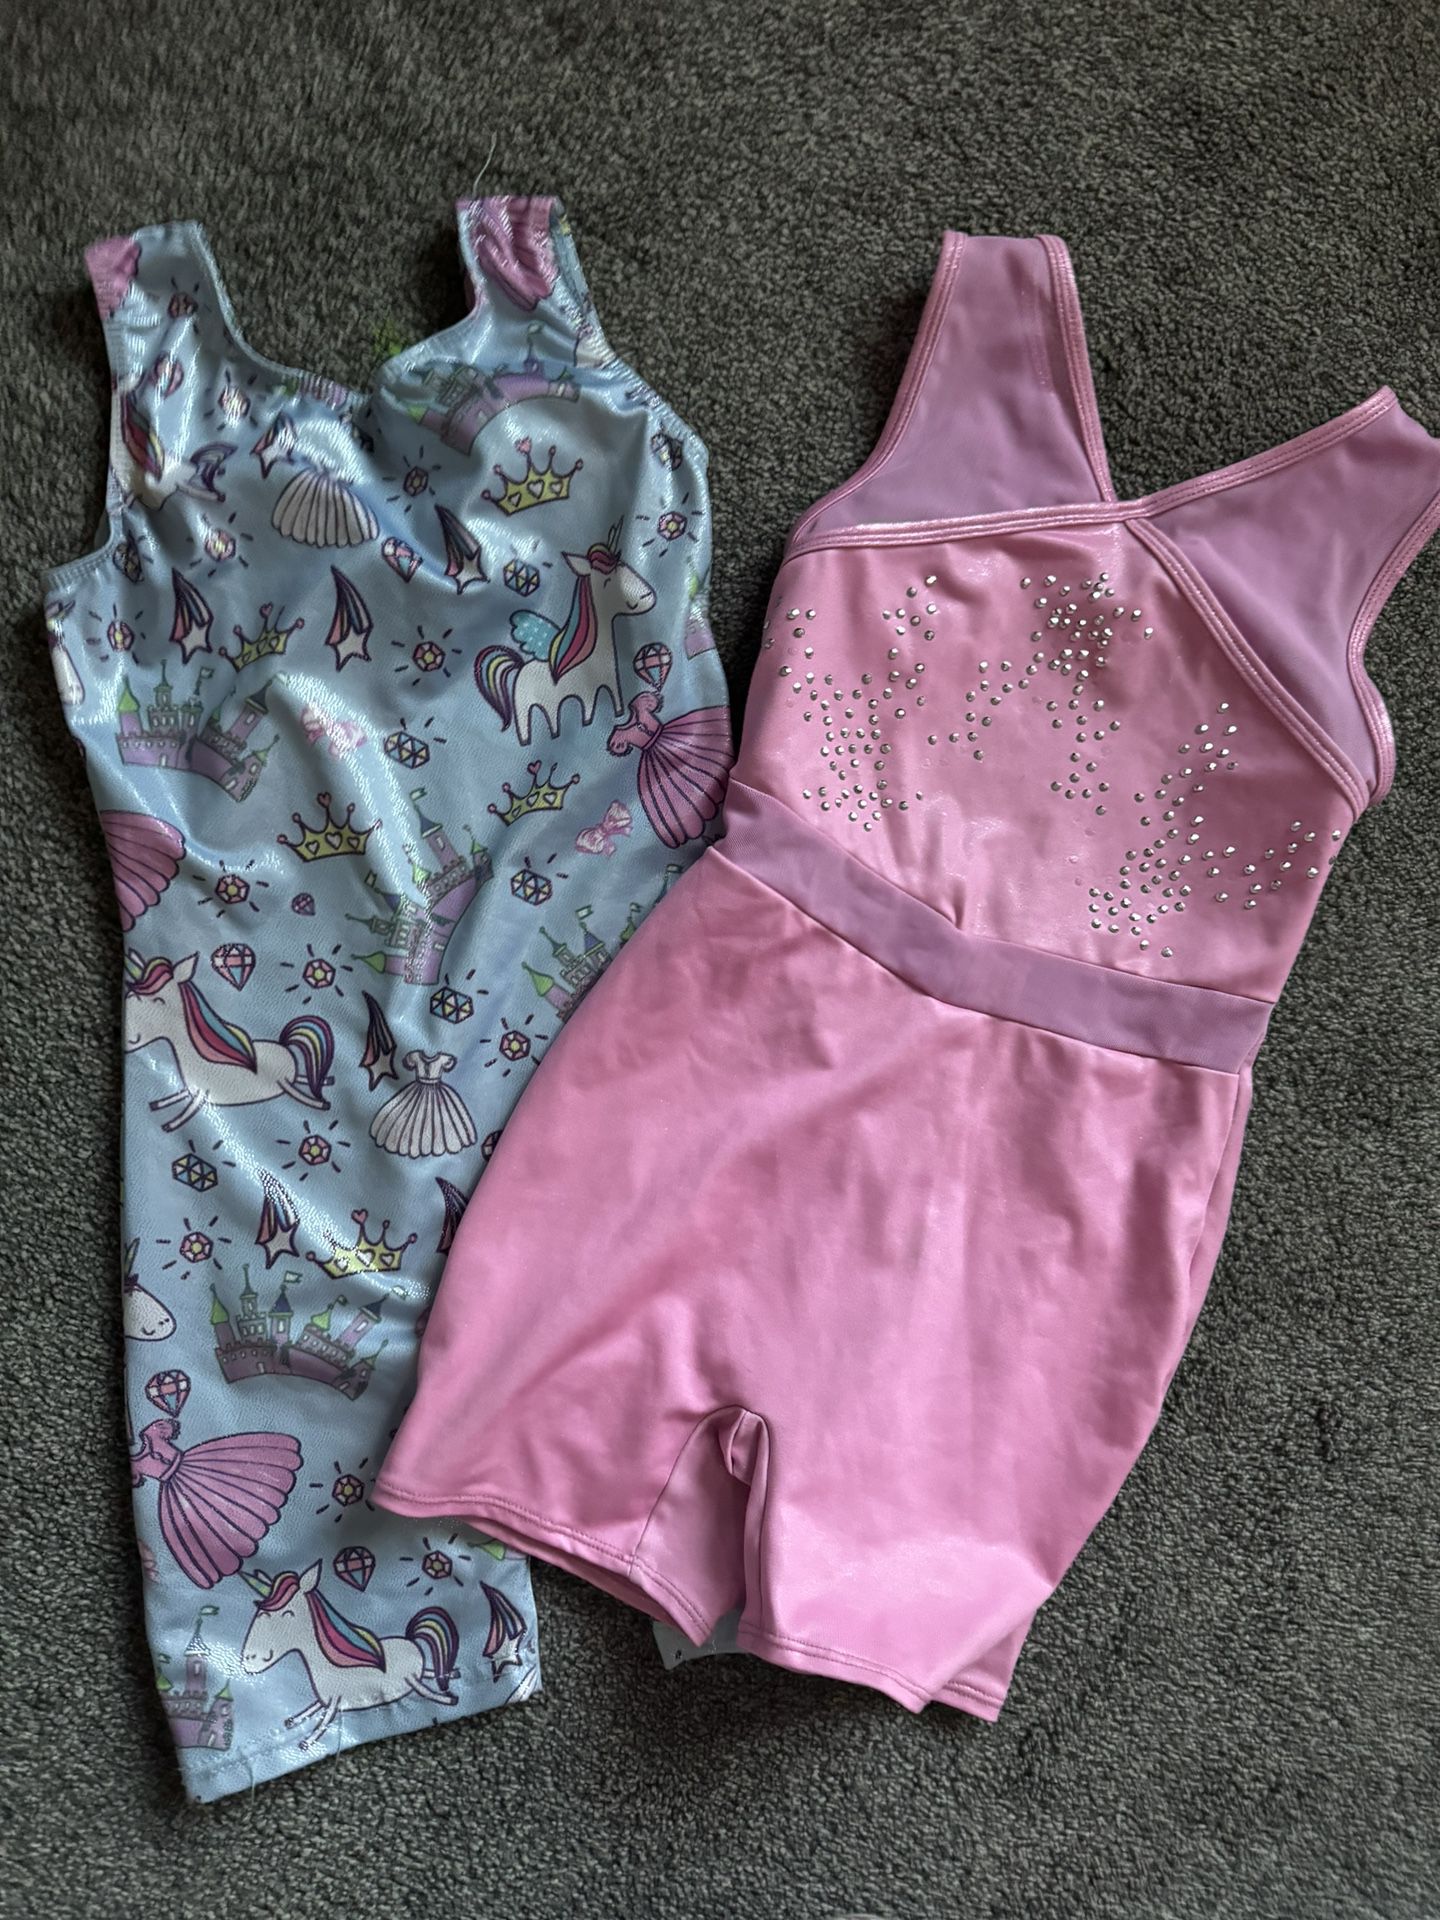 Girls Gymnastic Outfit Size 7/8